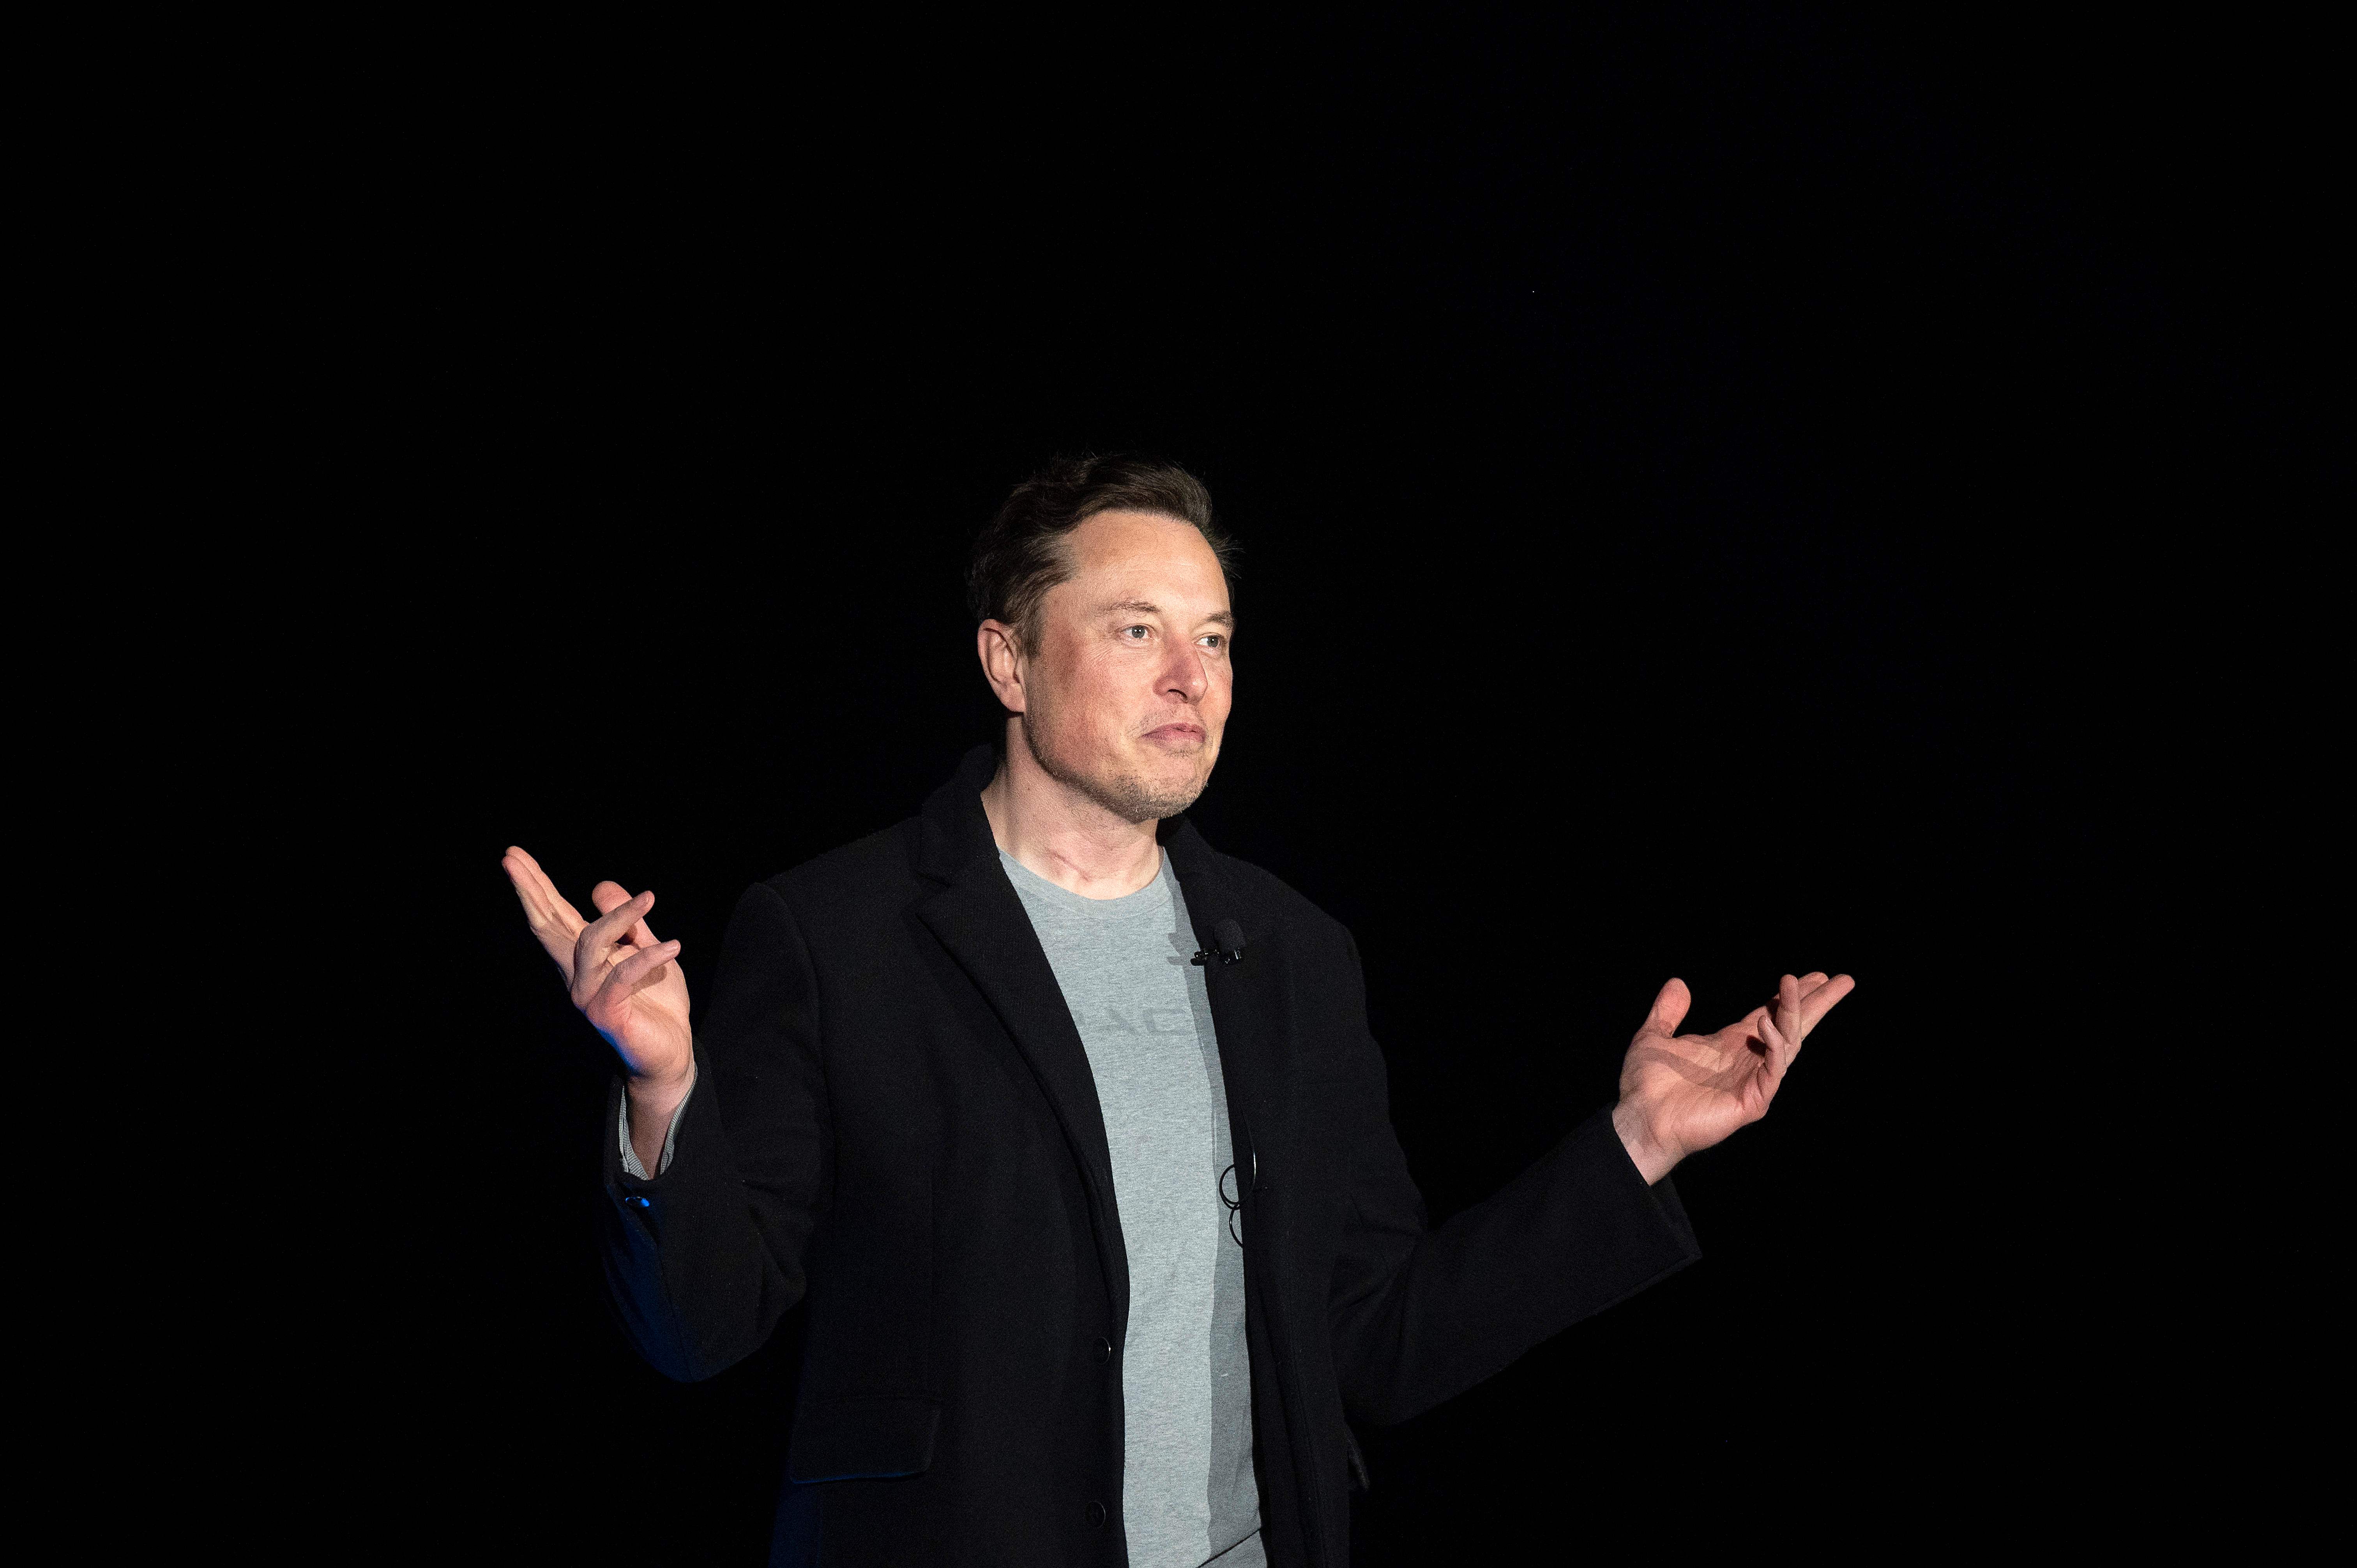 Elon Musk is no more world’s richest person after he lost spot in Forbes’ annual World’s Billionaire’s List